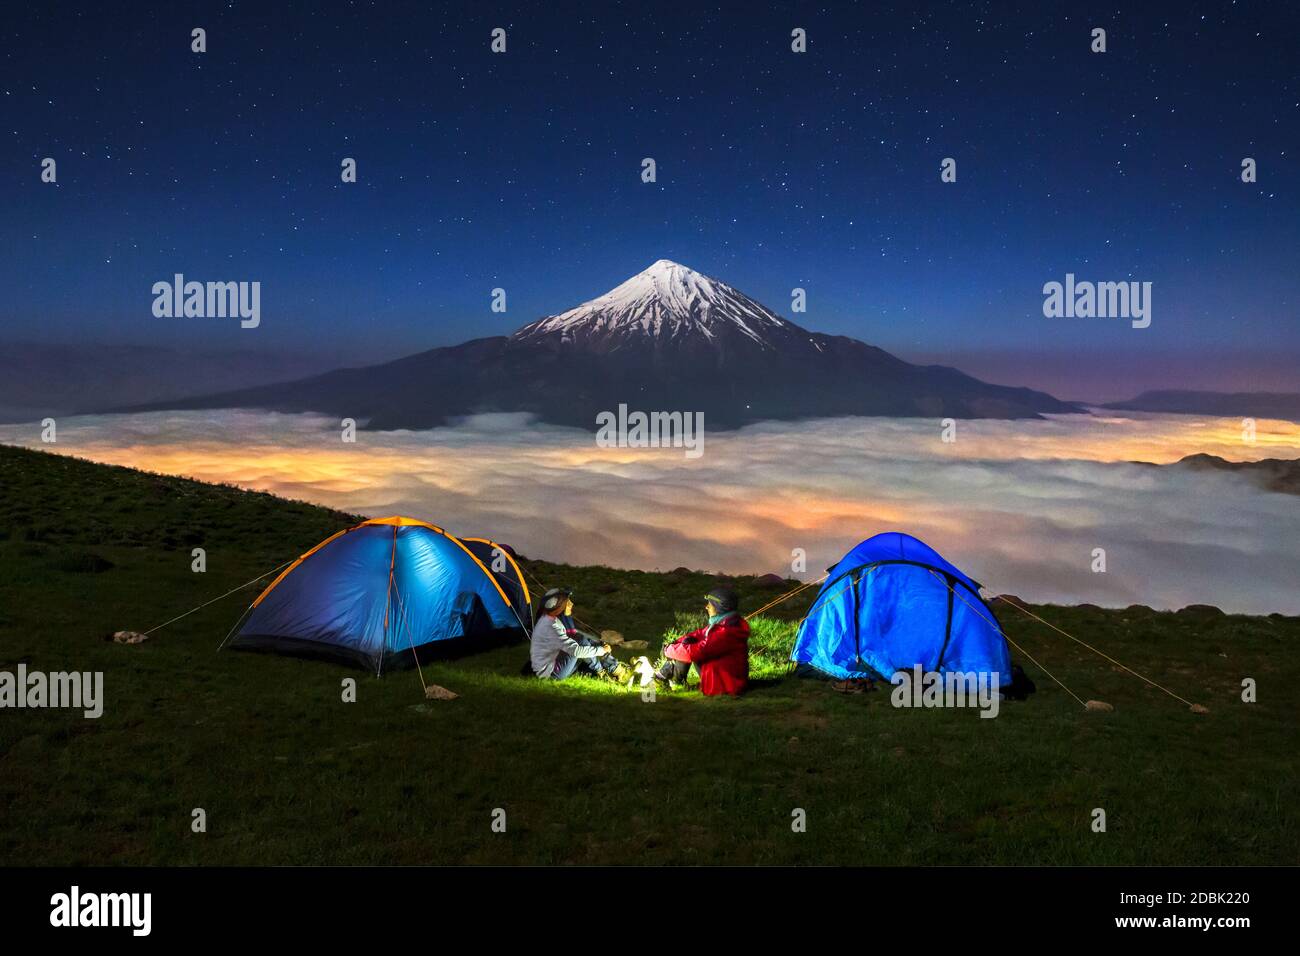 Mount Damavand, a potentially active volcano, is a stratovolcano which is the highest peak in Iran and the highest volcano in Asia. Stock Photo